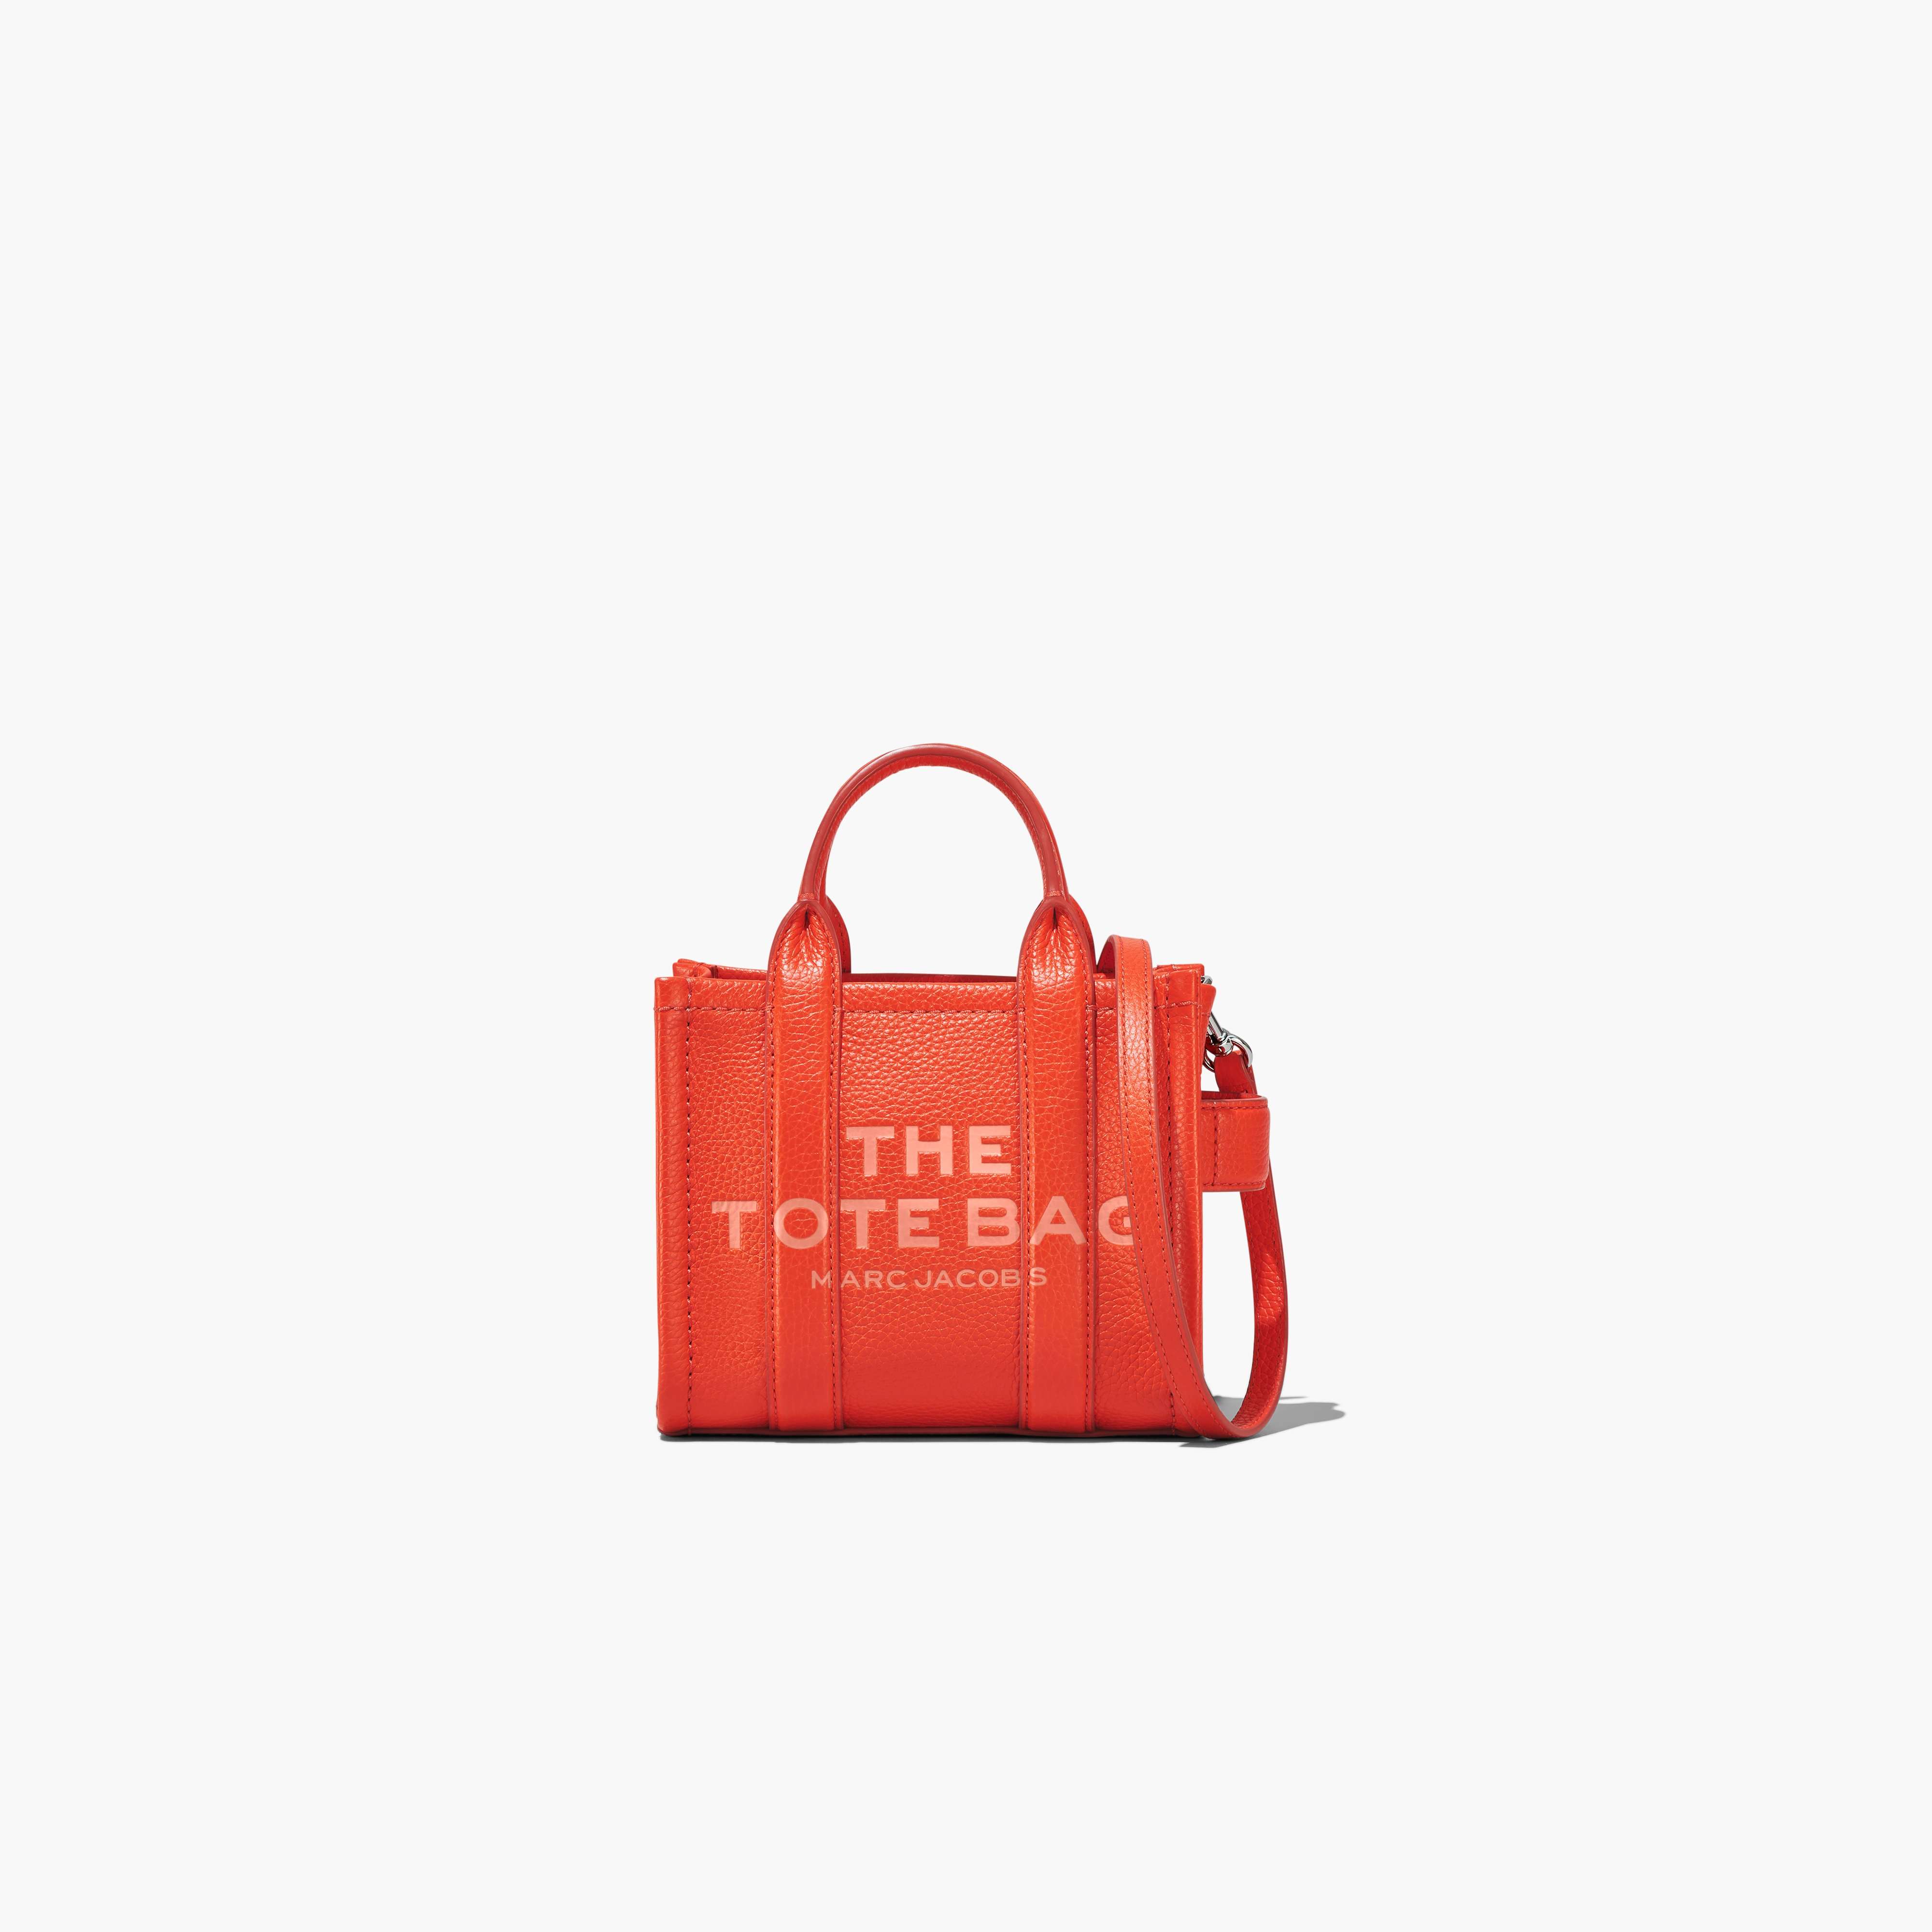 The Leather Crossbody Tote Bag in Electric Orange